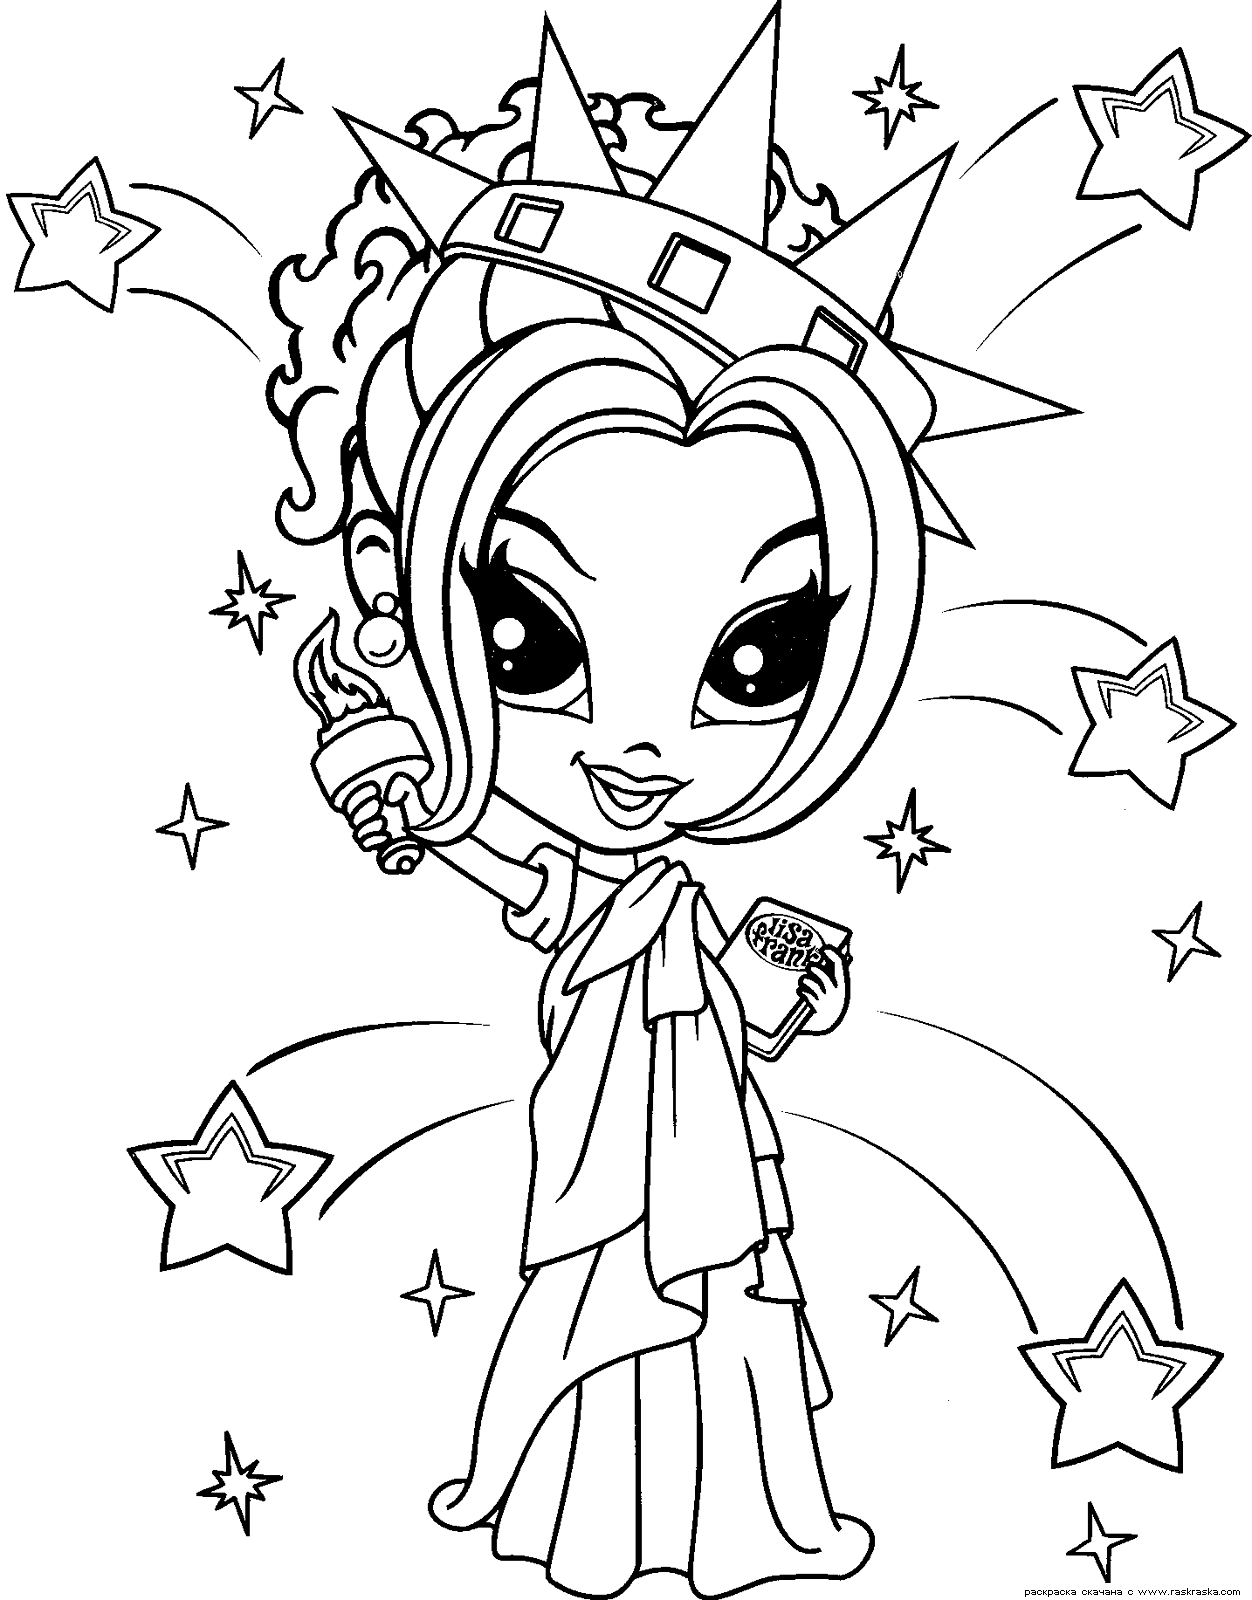 9 Pics of Lisa Frank Girl Coloring Pages Ice Cream - Lisa Frank ...